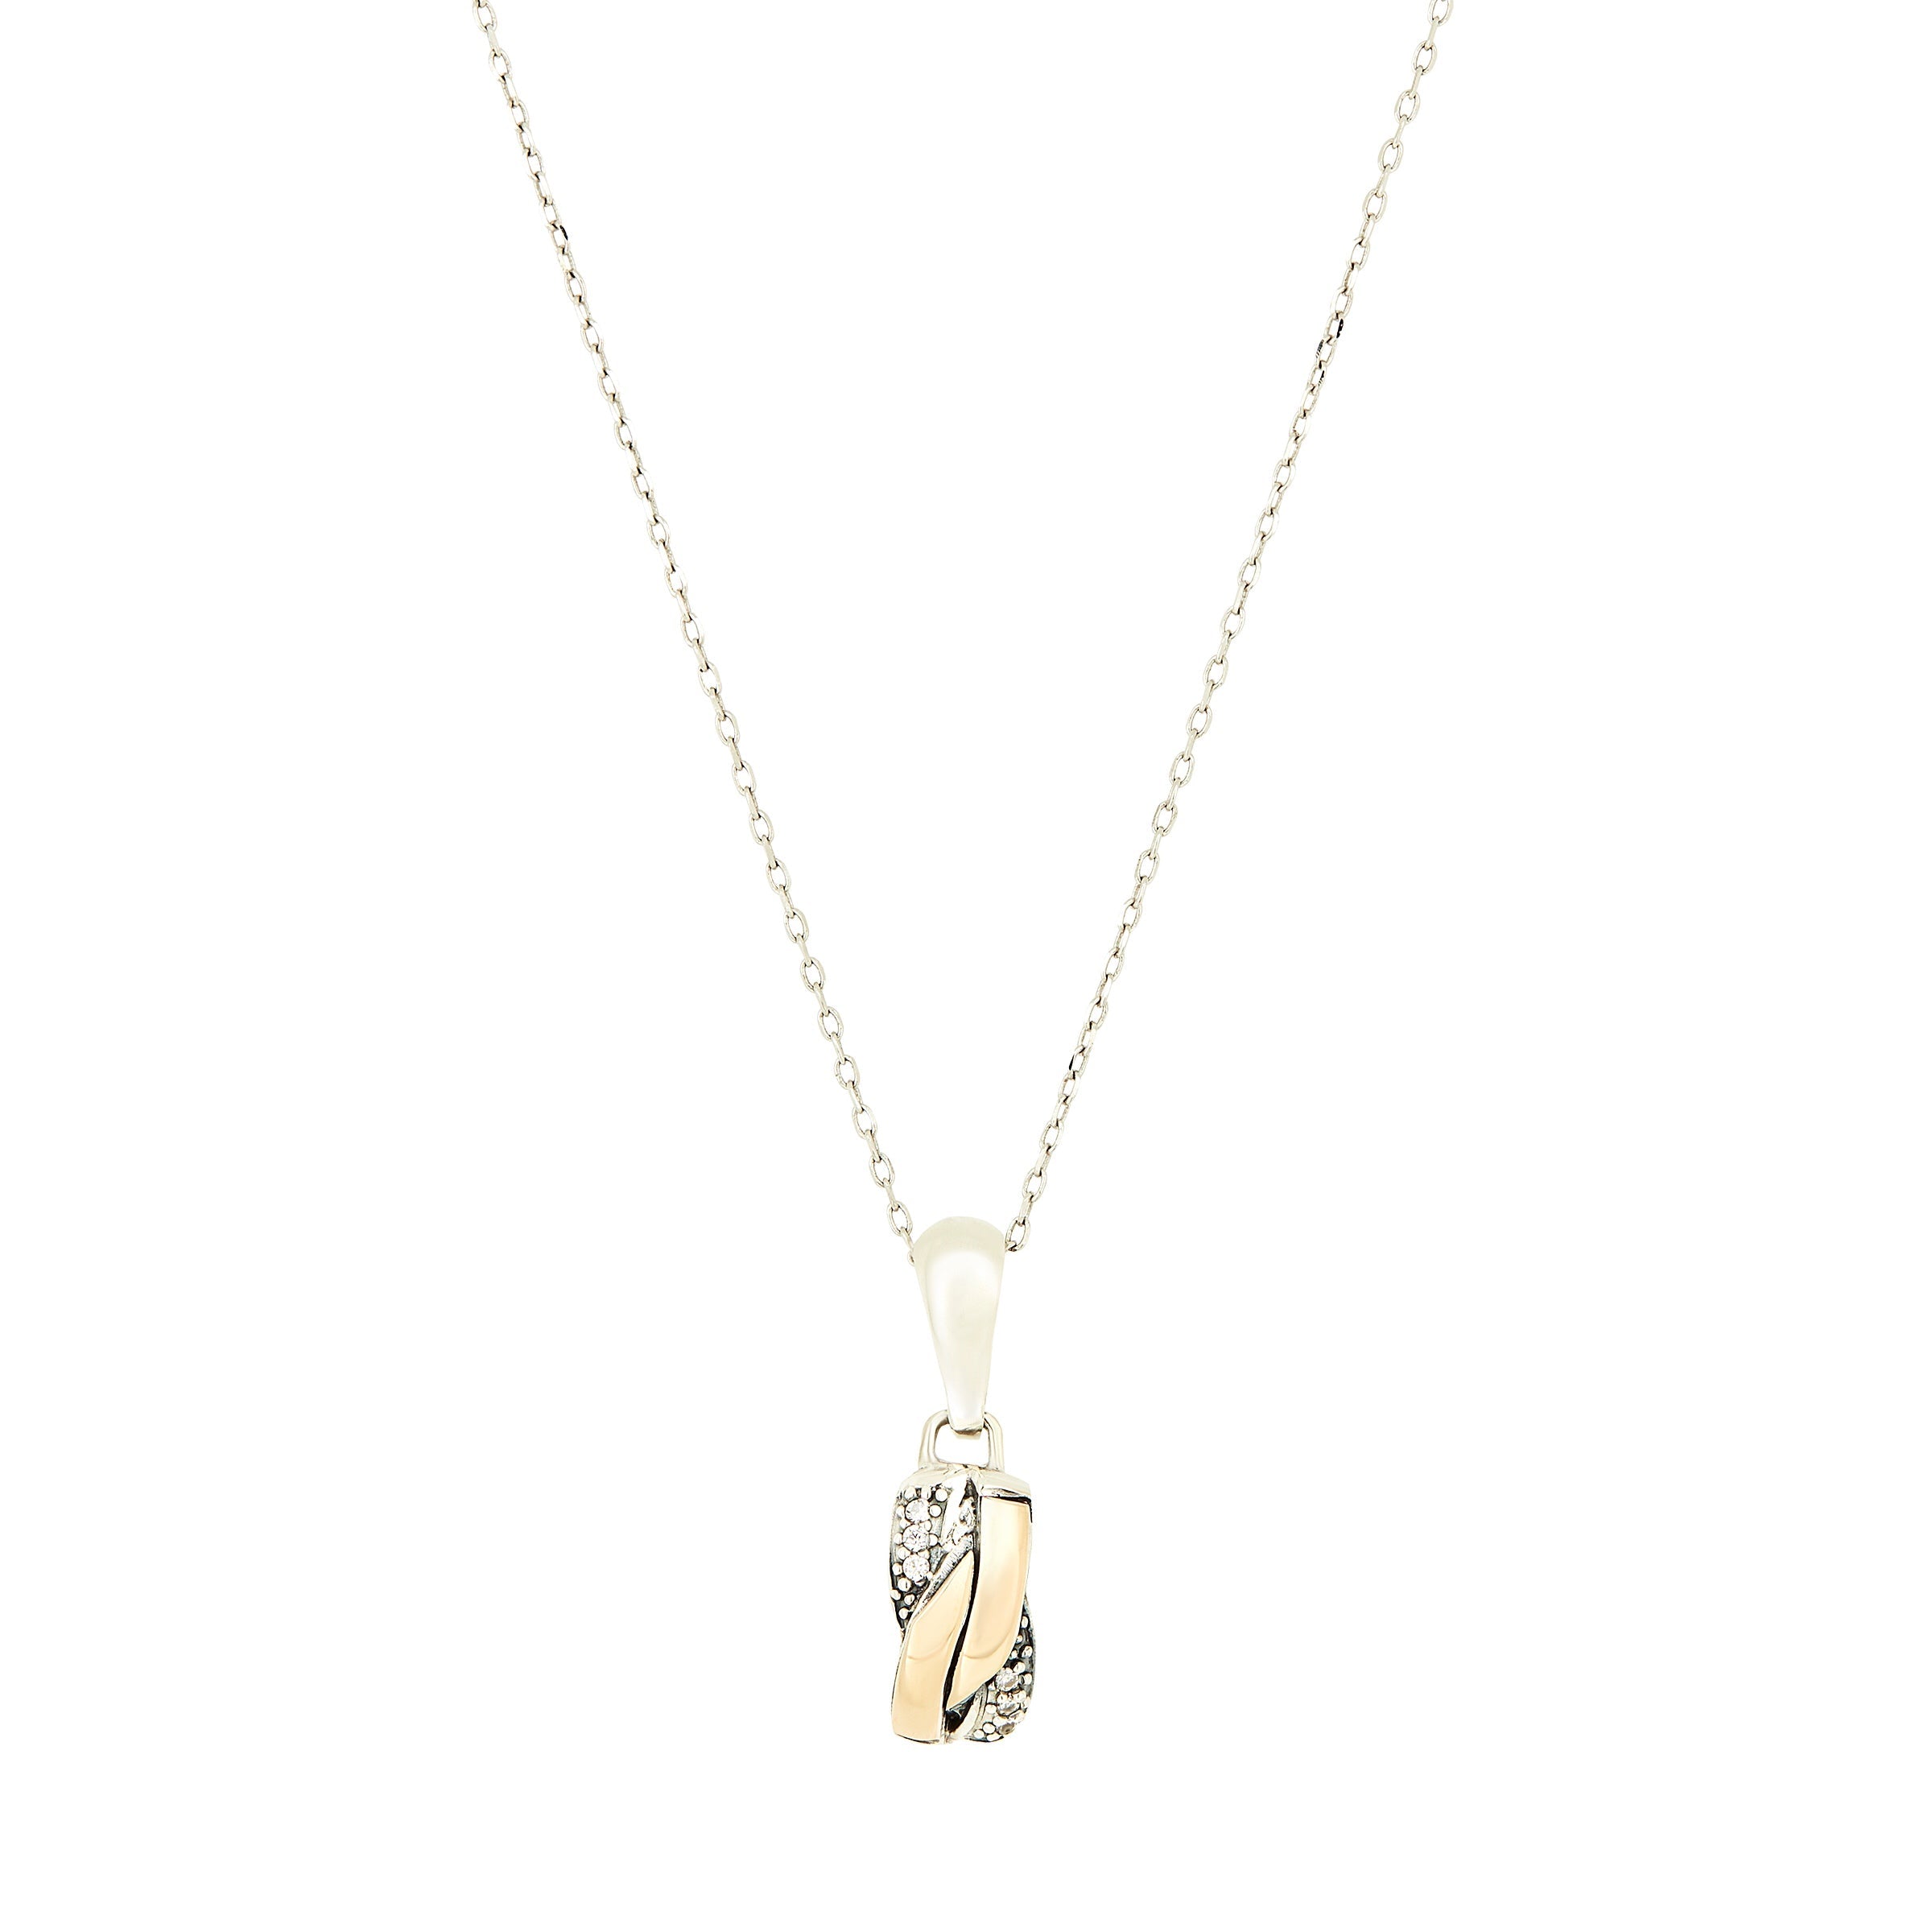 DOLCE VITA NECKLACE - Sterling Silver & 14k Yellow Gold-Tayroni